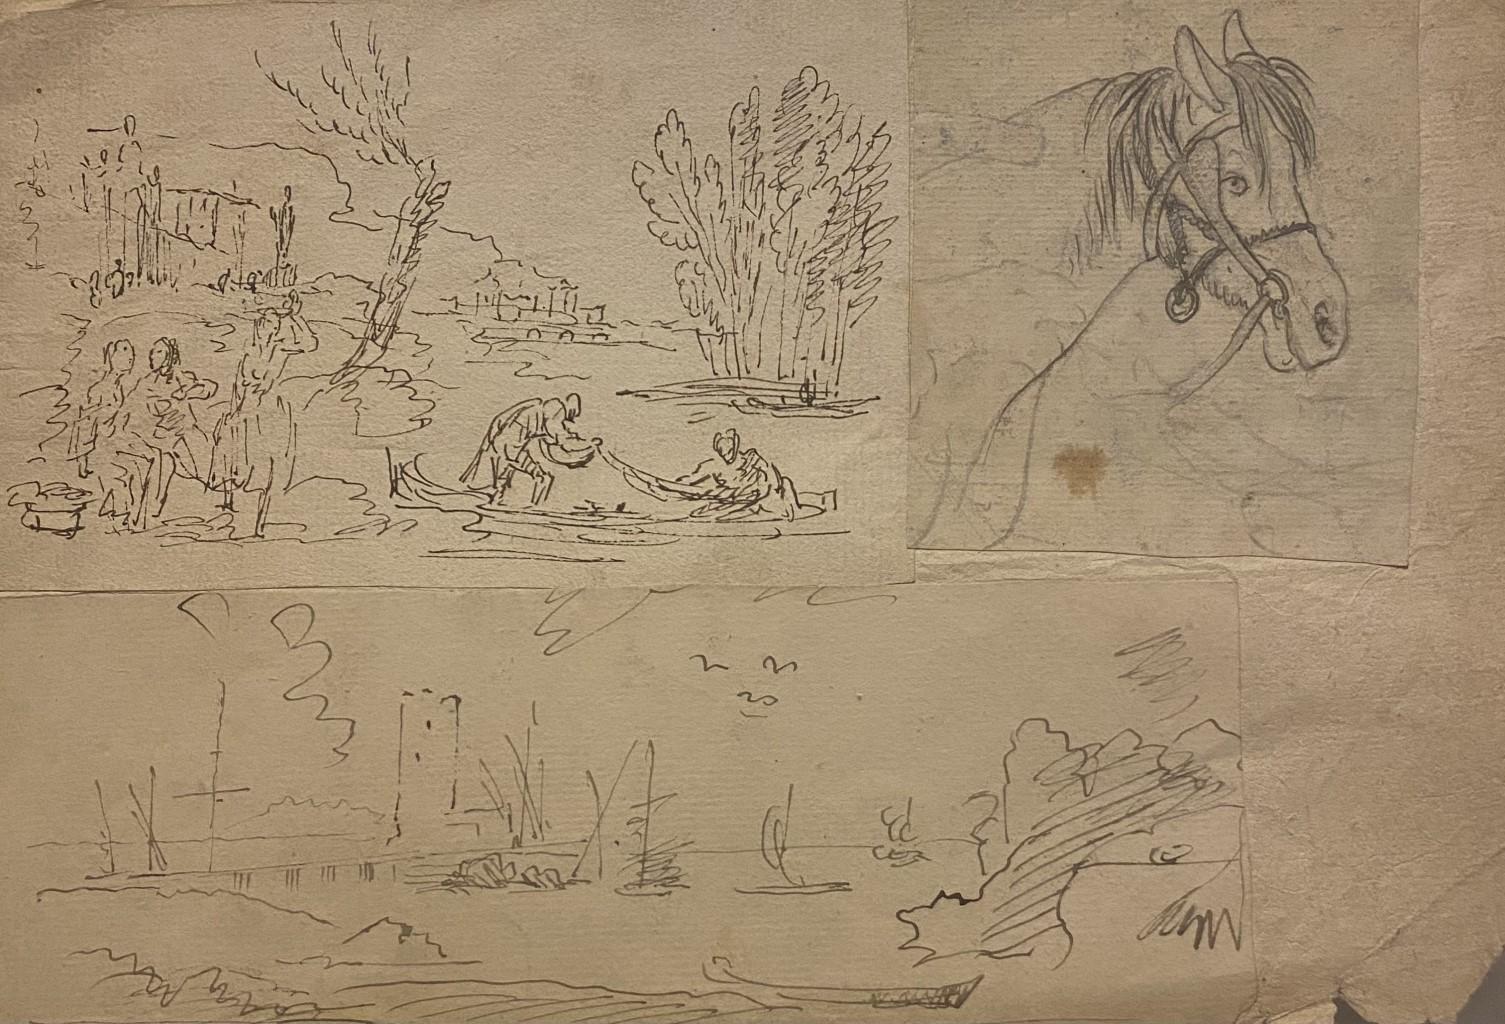 Unknown Figurative Art - Different Designs - Original Pencil and China Ink on Paper - 19th Century